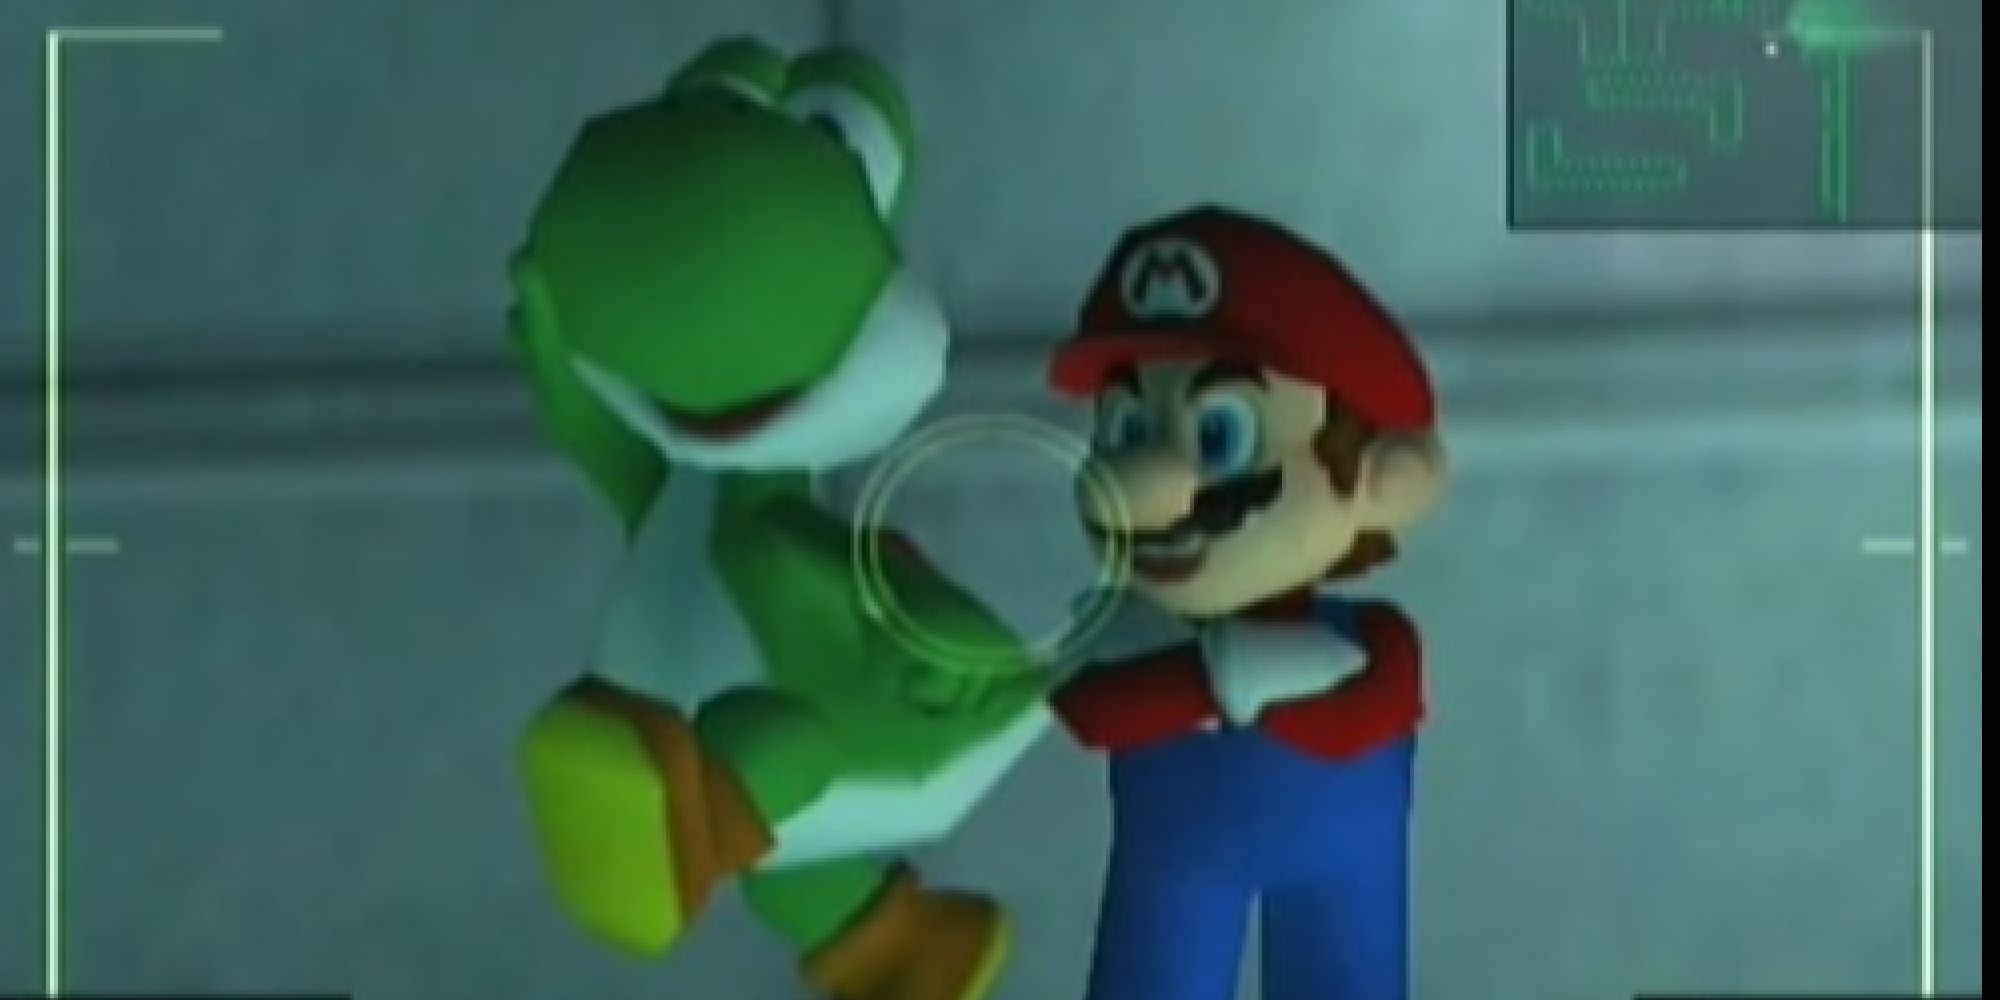 Mini statues of Mario and Yoshi appearing in Metal Gear Solid: Twin Snakes